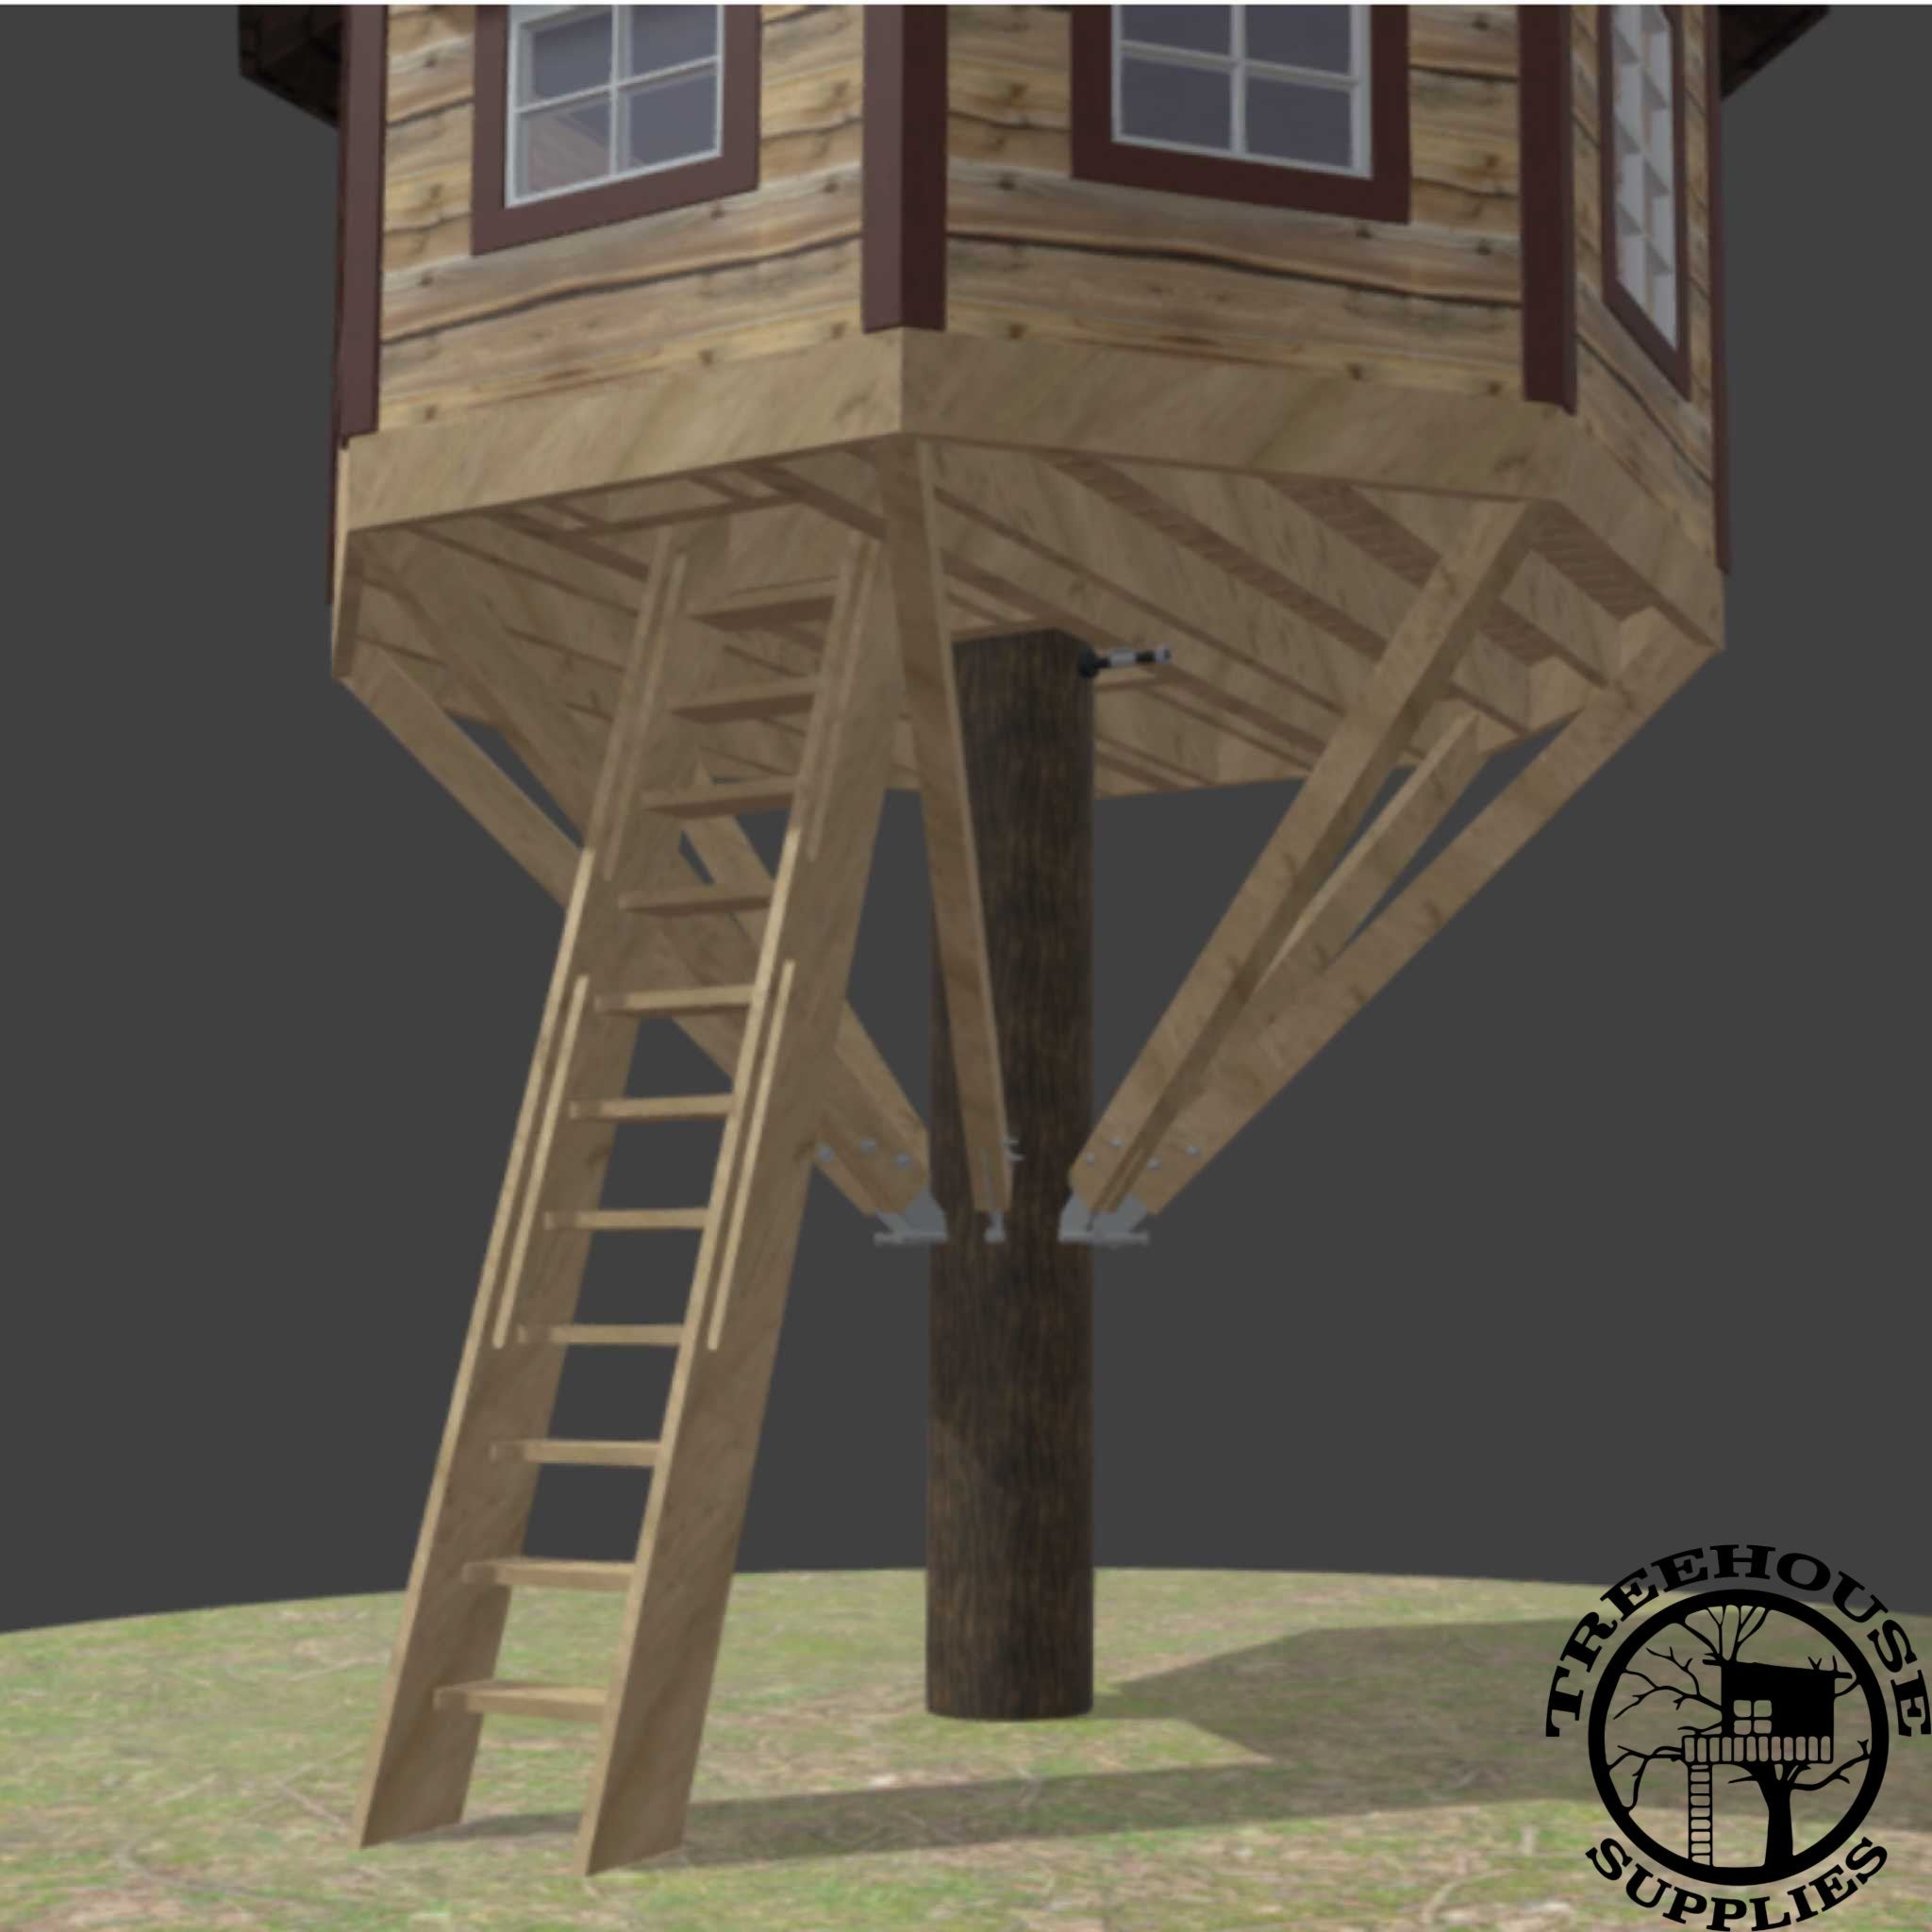 12' DIAMETER OCTAGONAL TREEHOUSE PLAN - NOW INCLUDES STEP-BY-STEP 3D MODELING!! - Treehouse Supplies